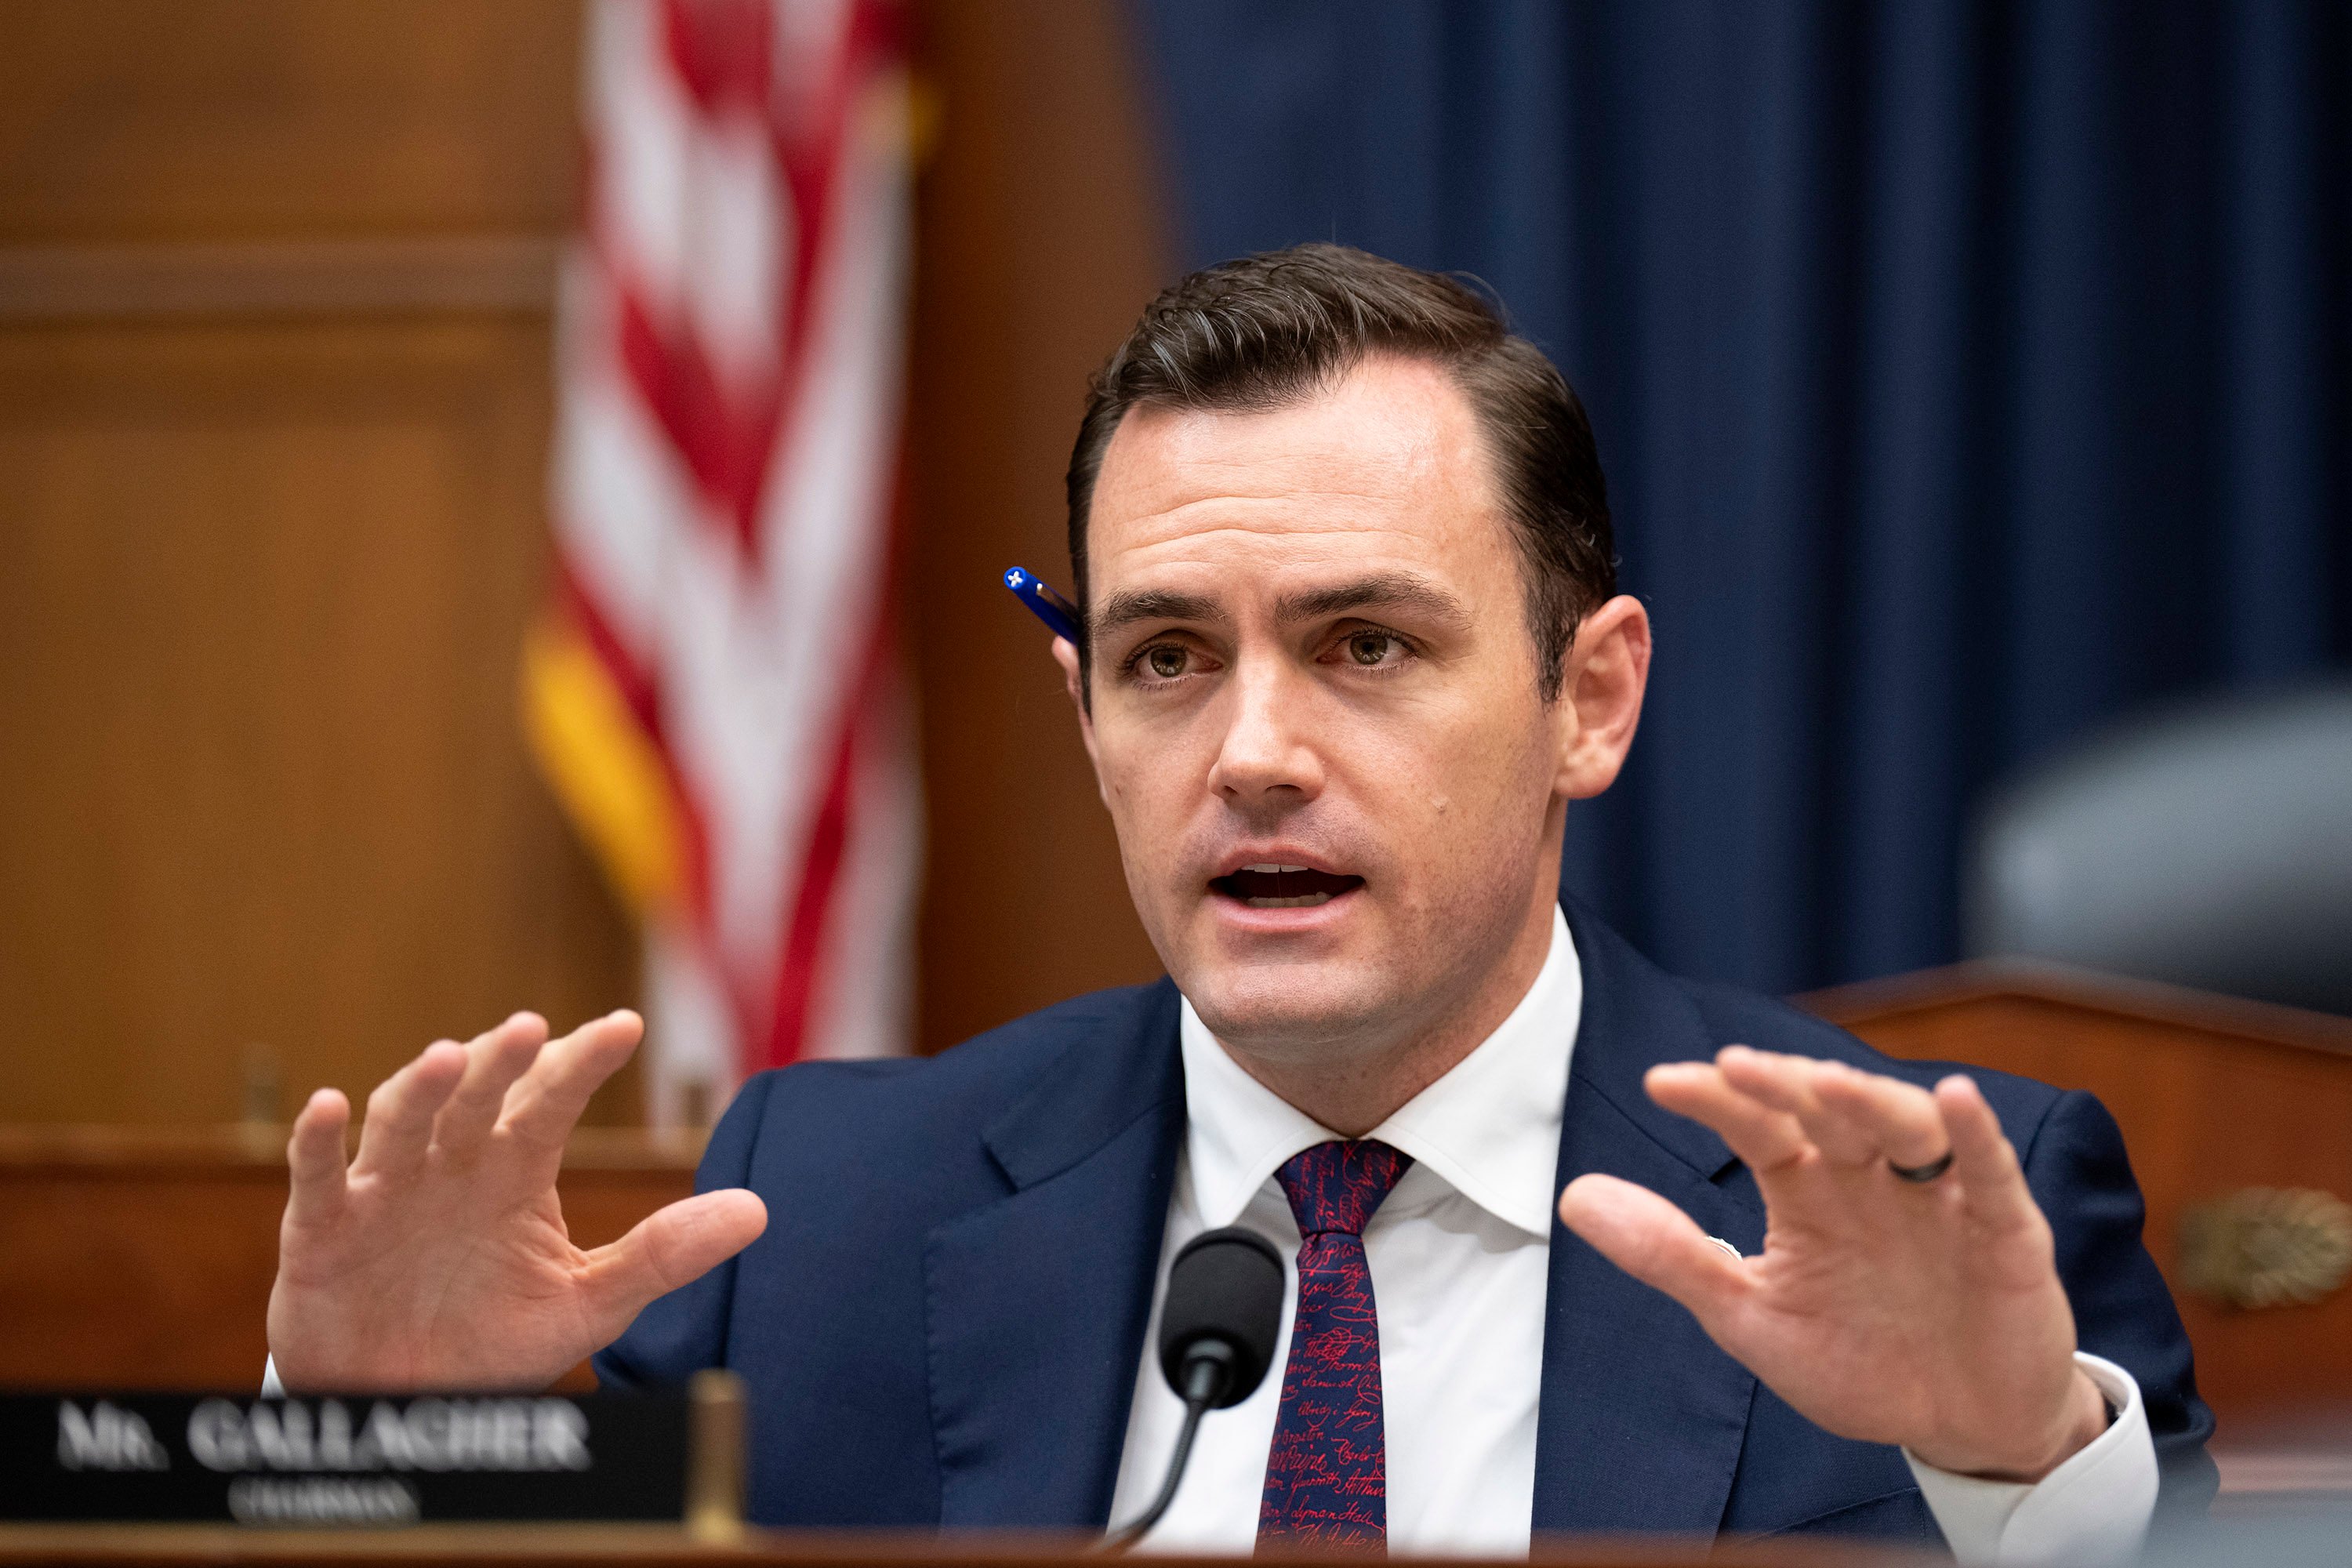 Mike Gallagher said he will resign from Congress on April 19. Photo: Getty/TNS